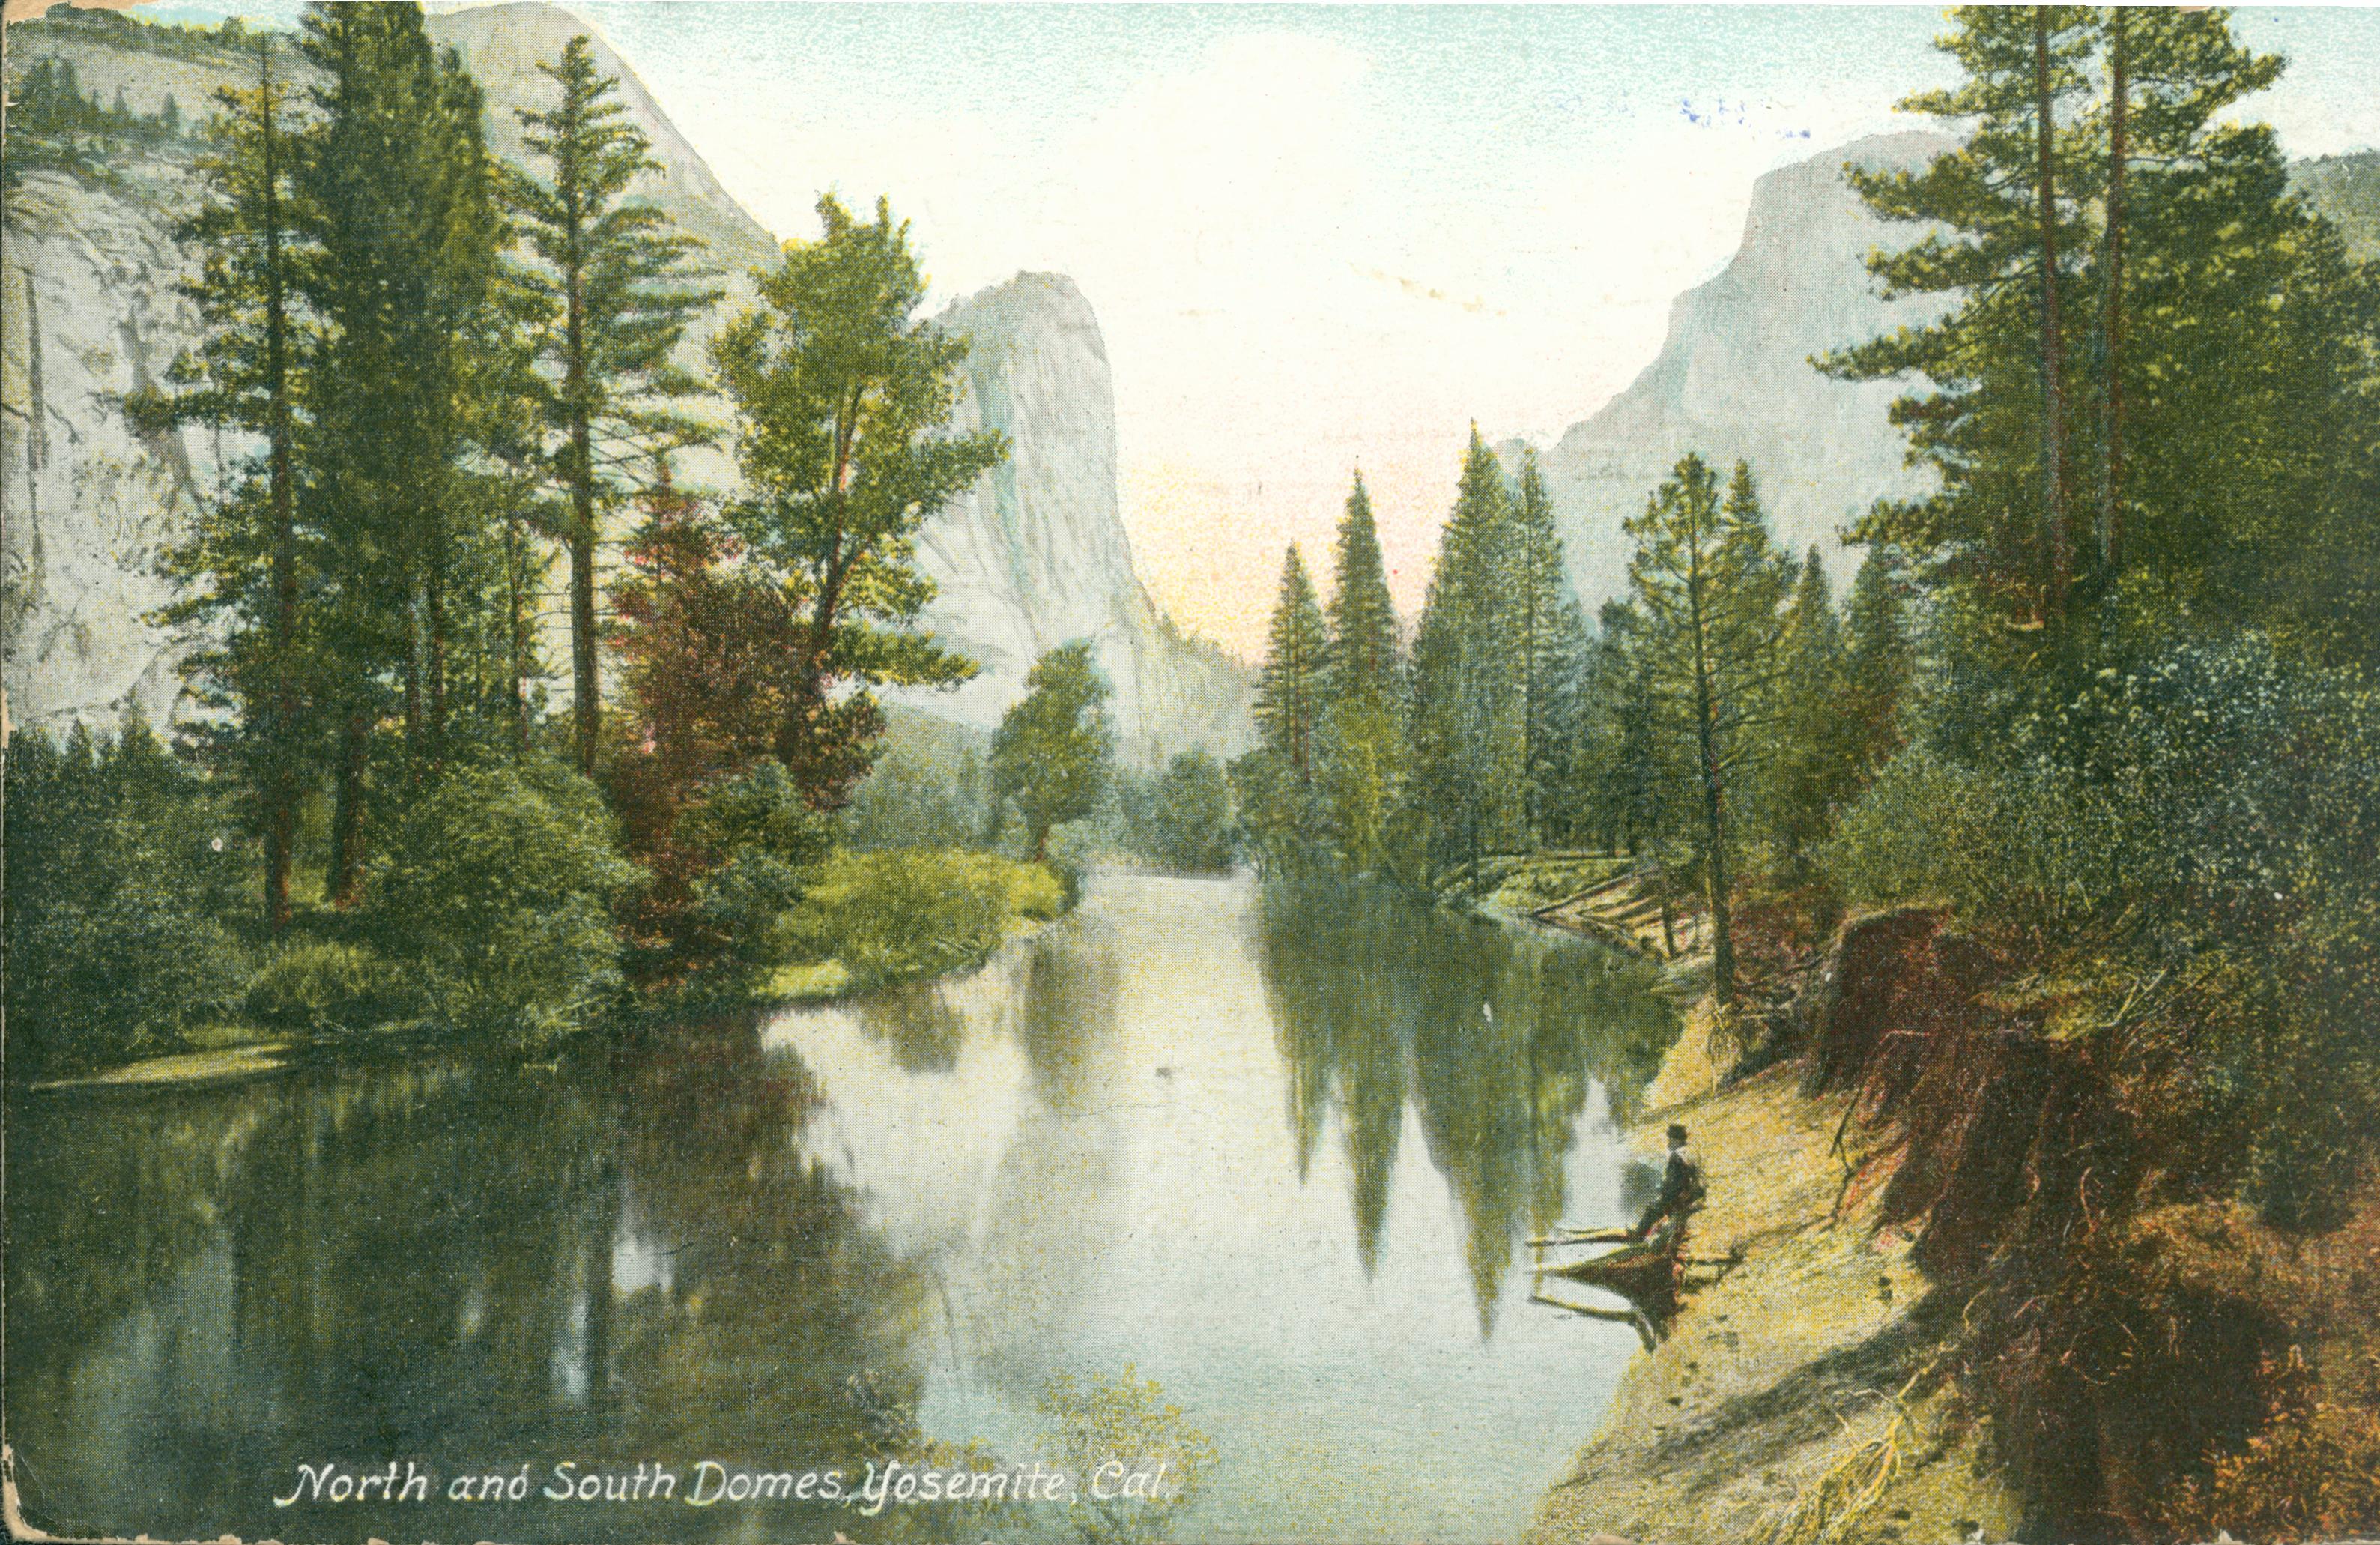 Shows a tree-lined river with a person sitting on the shore. In North and South Dome are in the background.